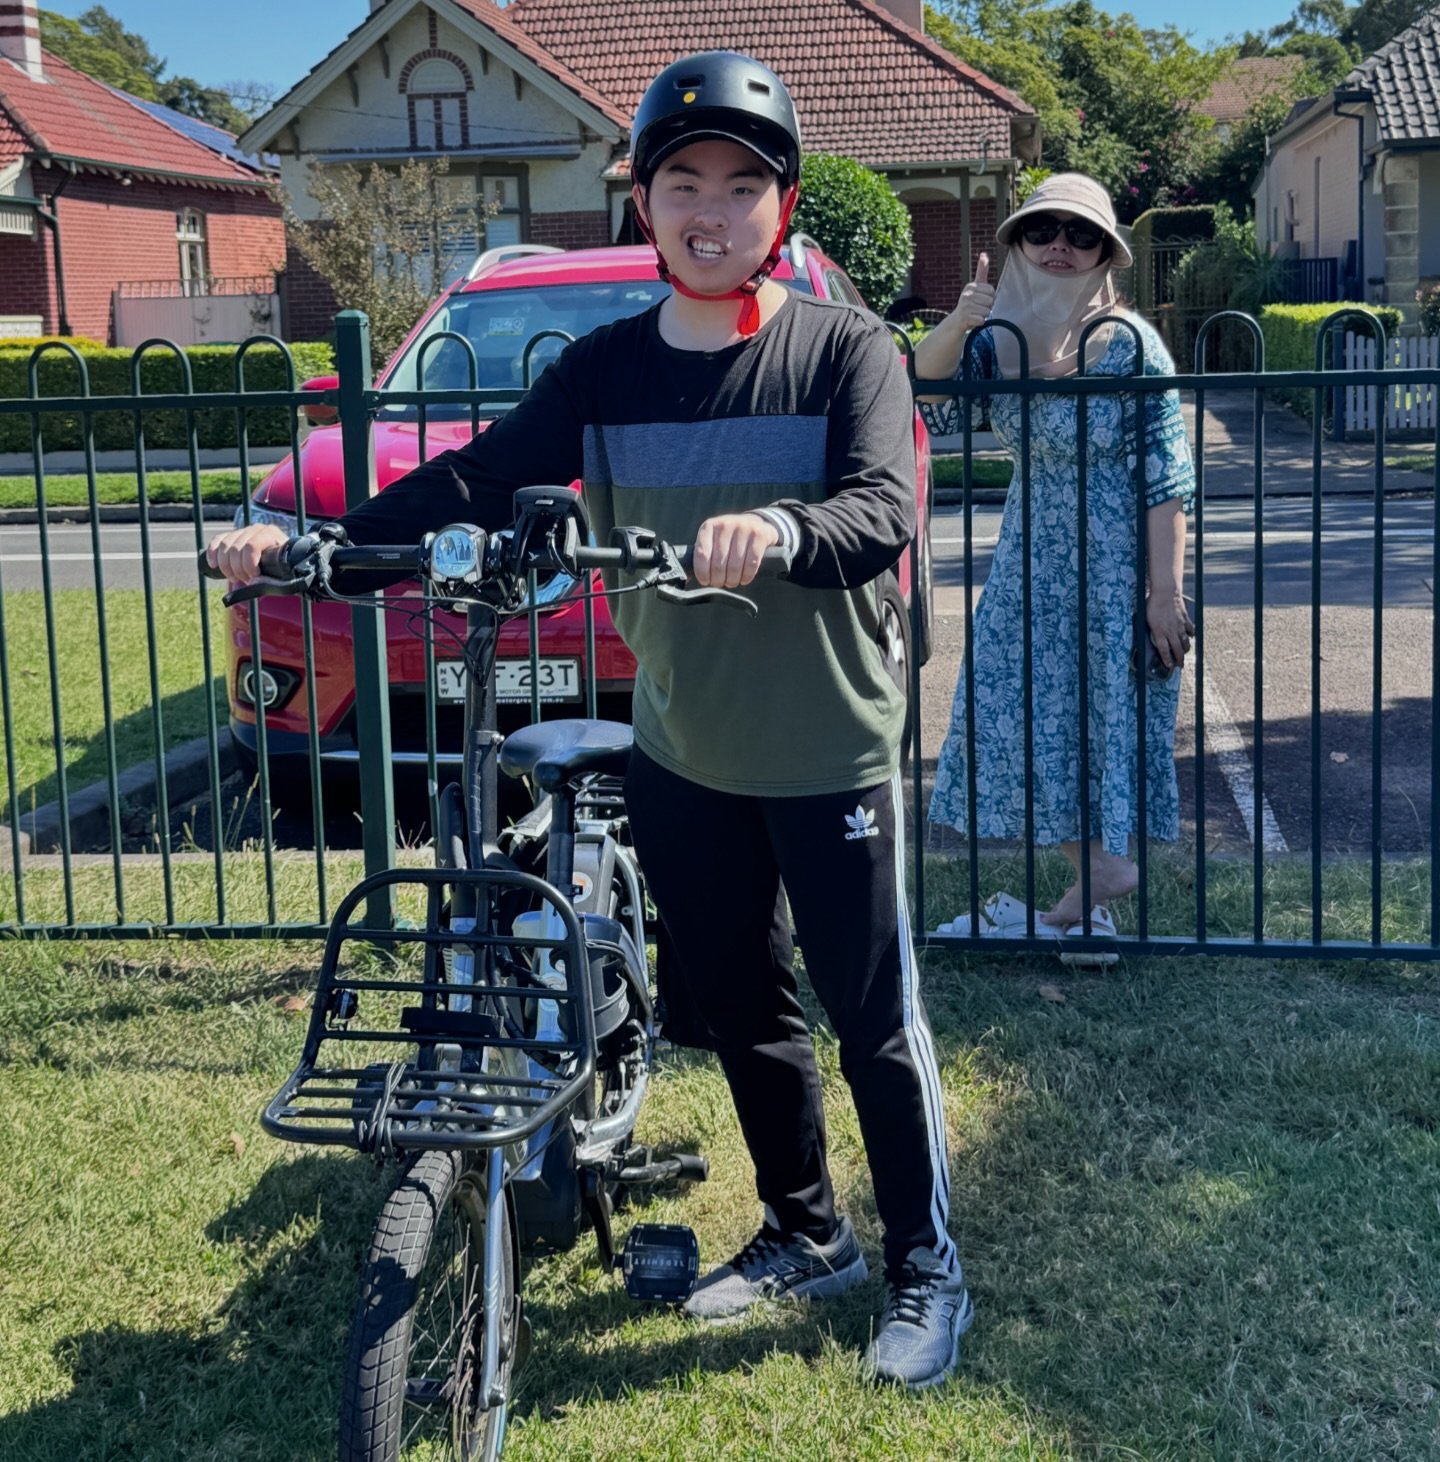 New Bike Day! Meet Mathew, who has learnt to ride a bike and is pedaling independently after less than two hours! We&rsquo;re thrilled to help new riders discover the joy of biking. We offer new riders the opportunity to start their journey on a Tern